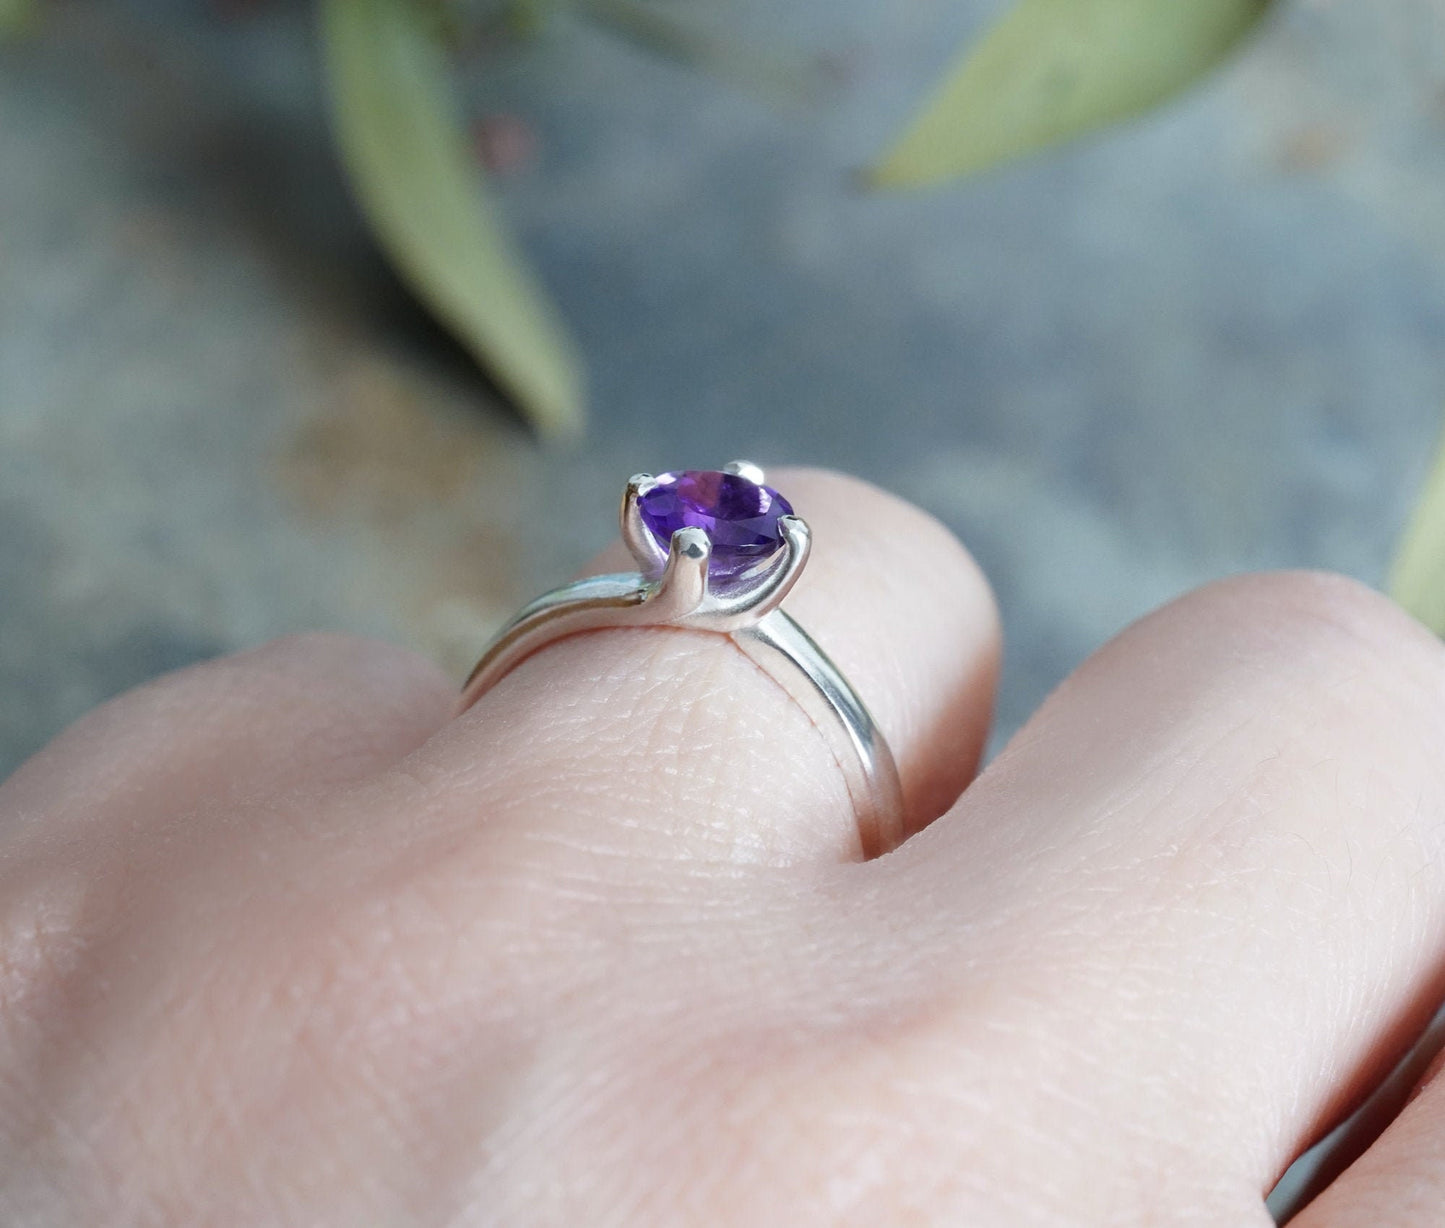 6mm Amethyst Ring in Sterling Silver, Amethyst Solitaire Ring, February Birthstone Ring, UK size L (US size 5.75)